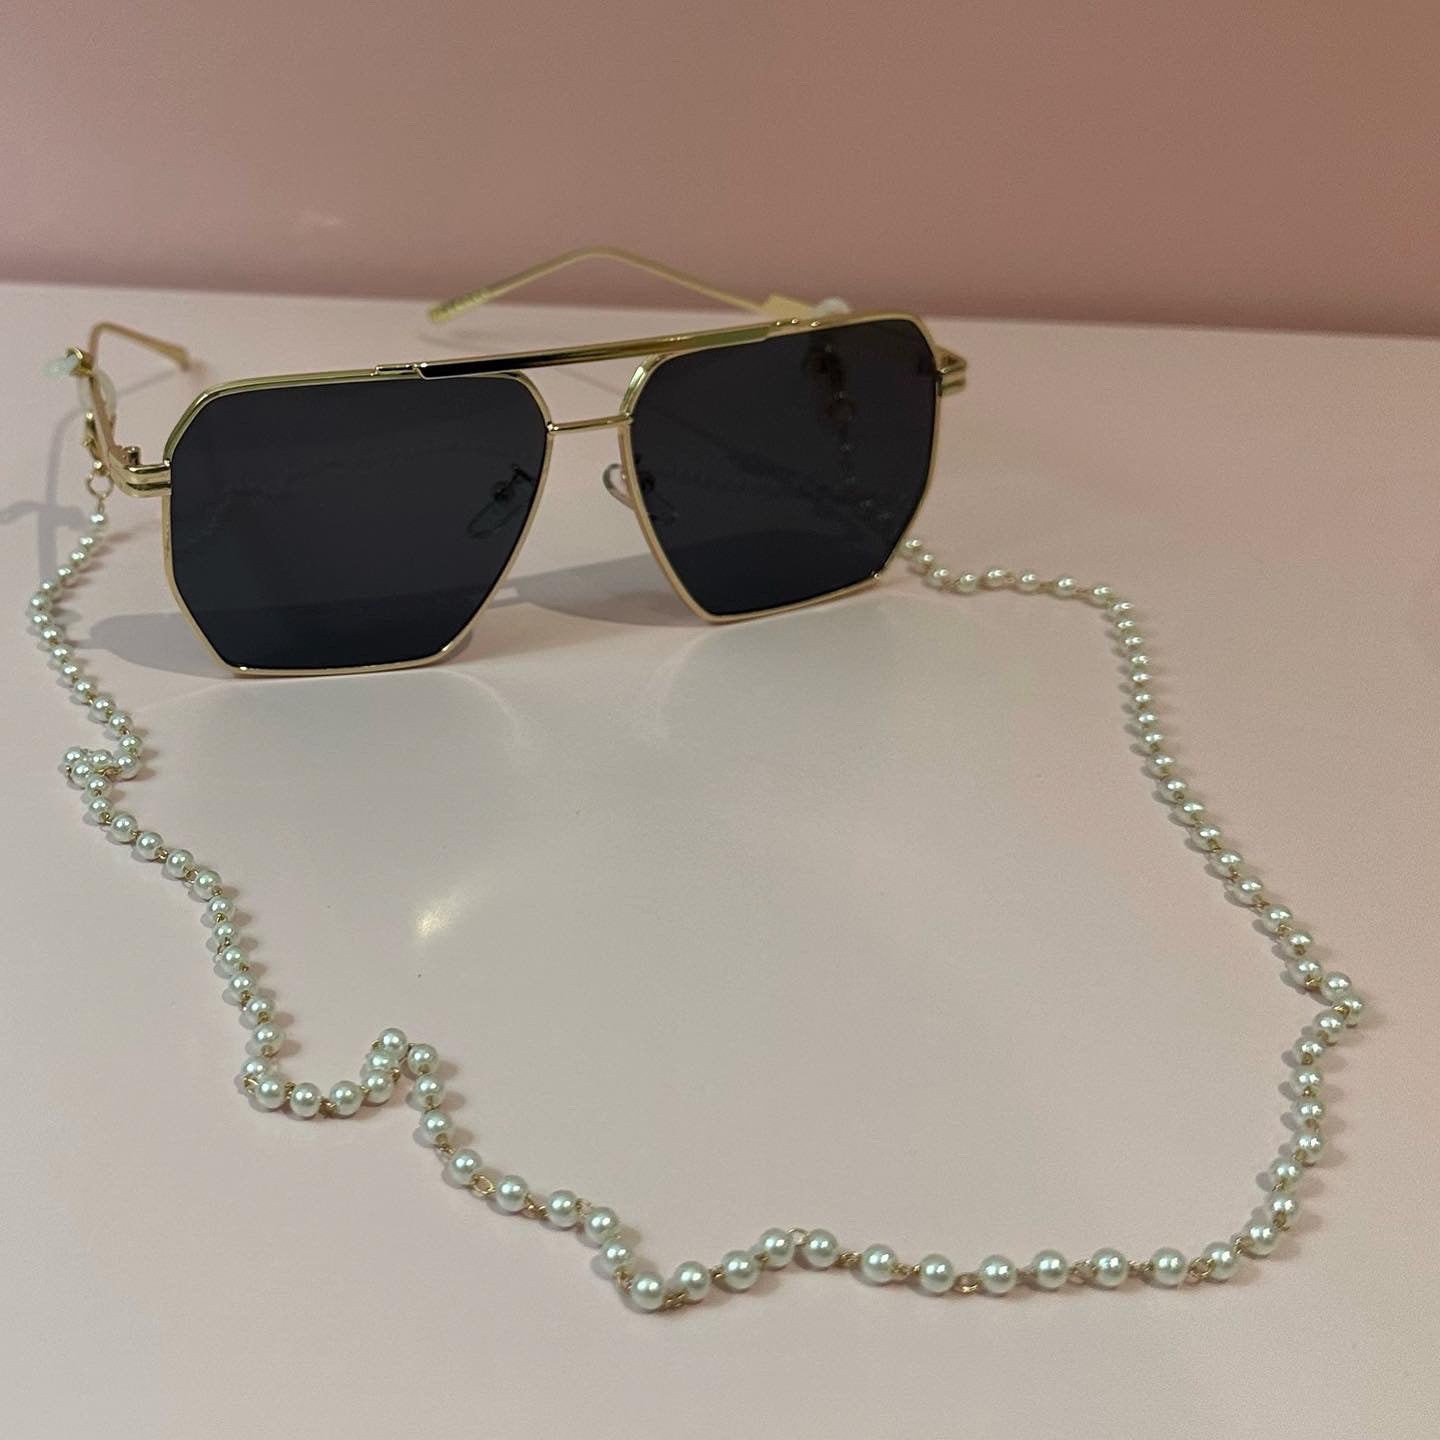 MILACCOLLECTION Pearl Beaded Sunglasses Chain